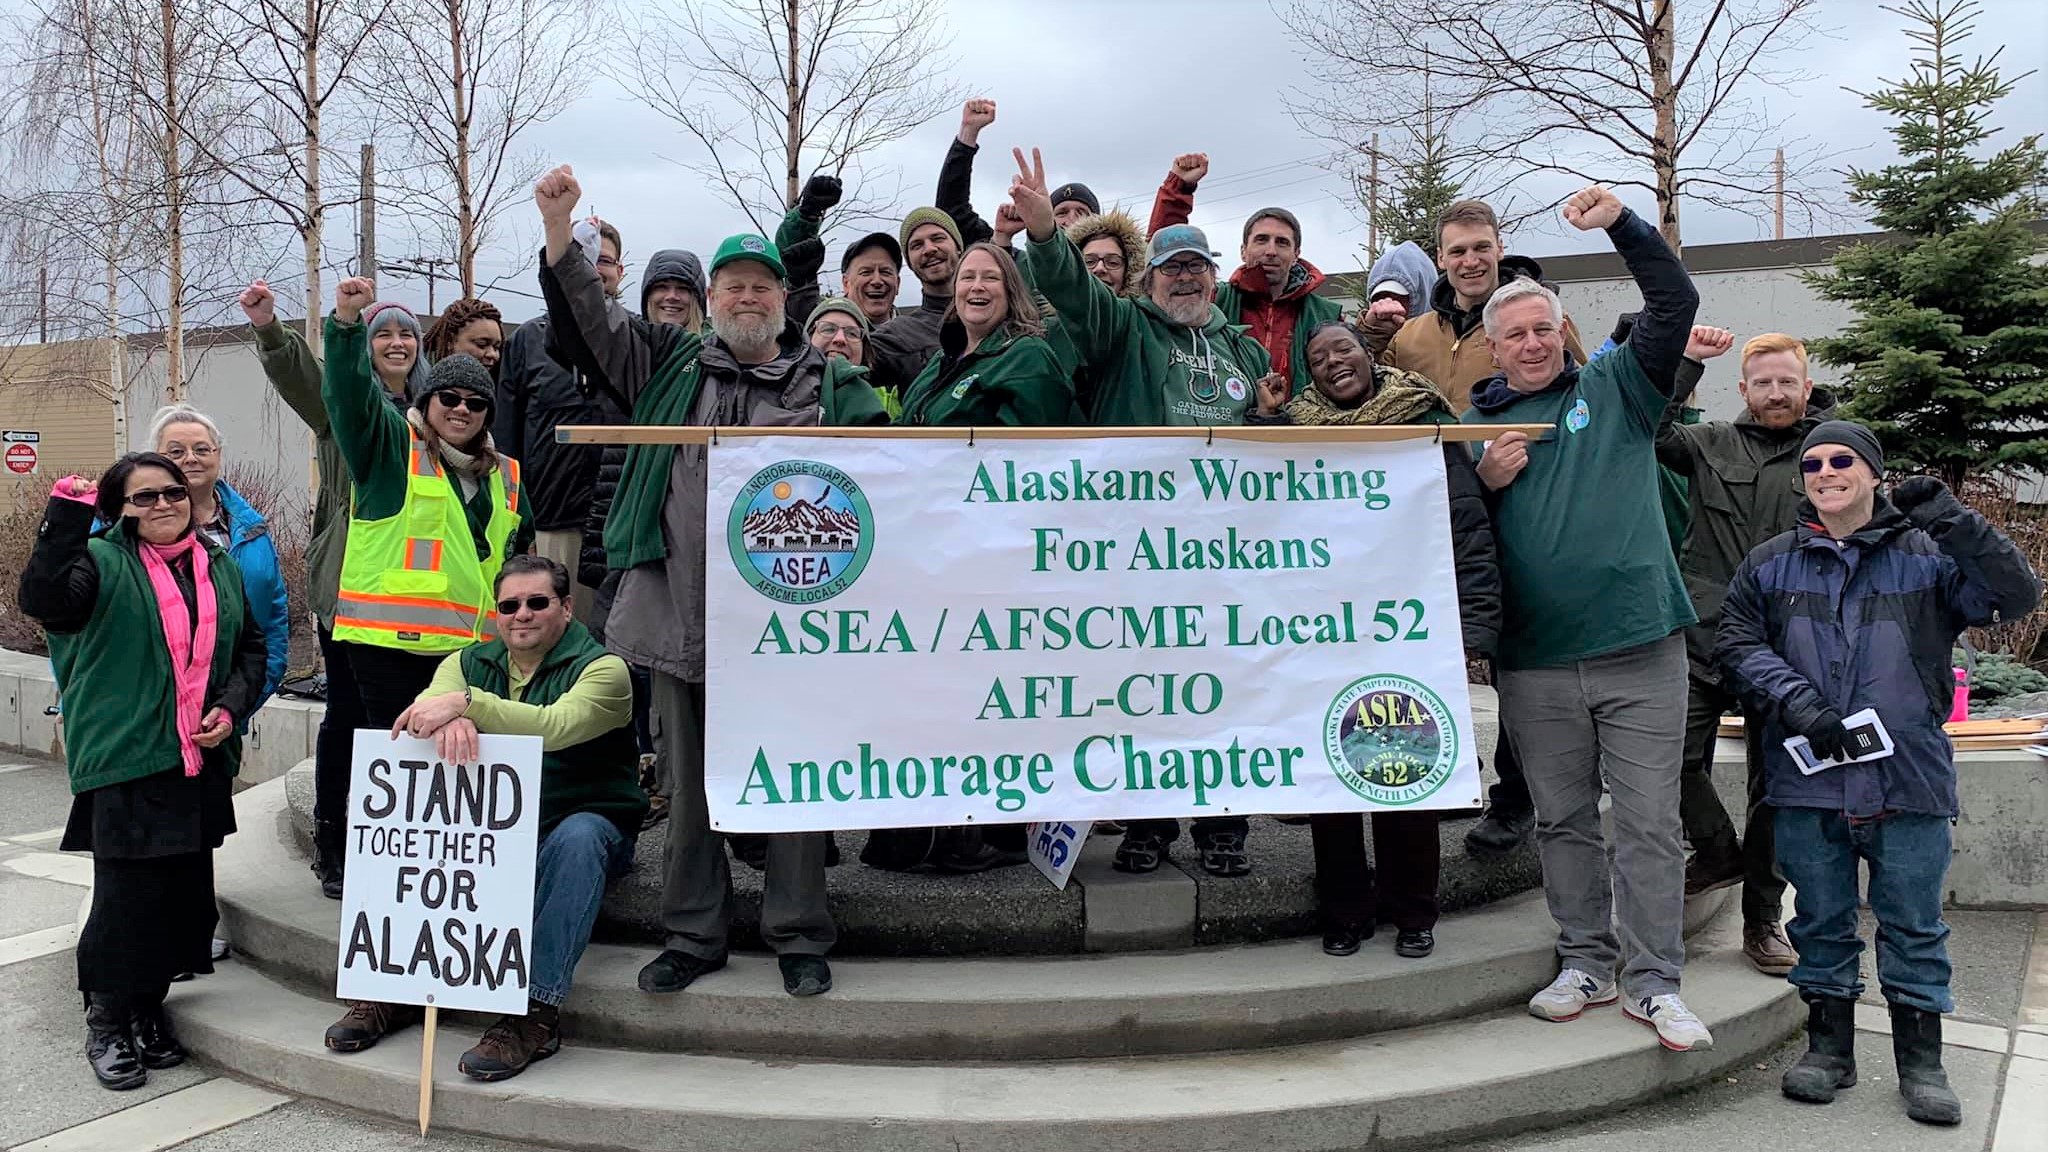 Now that Janus Failed, Alaska’s Anti-Public Services Governor Resorts to Dirty Tricks